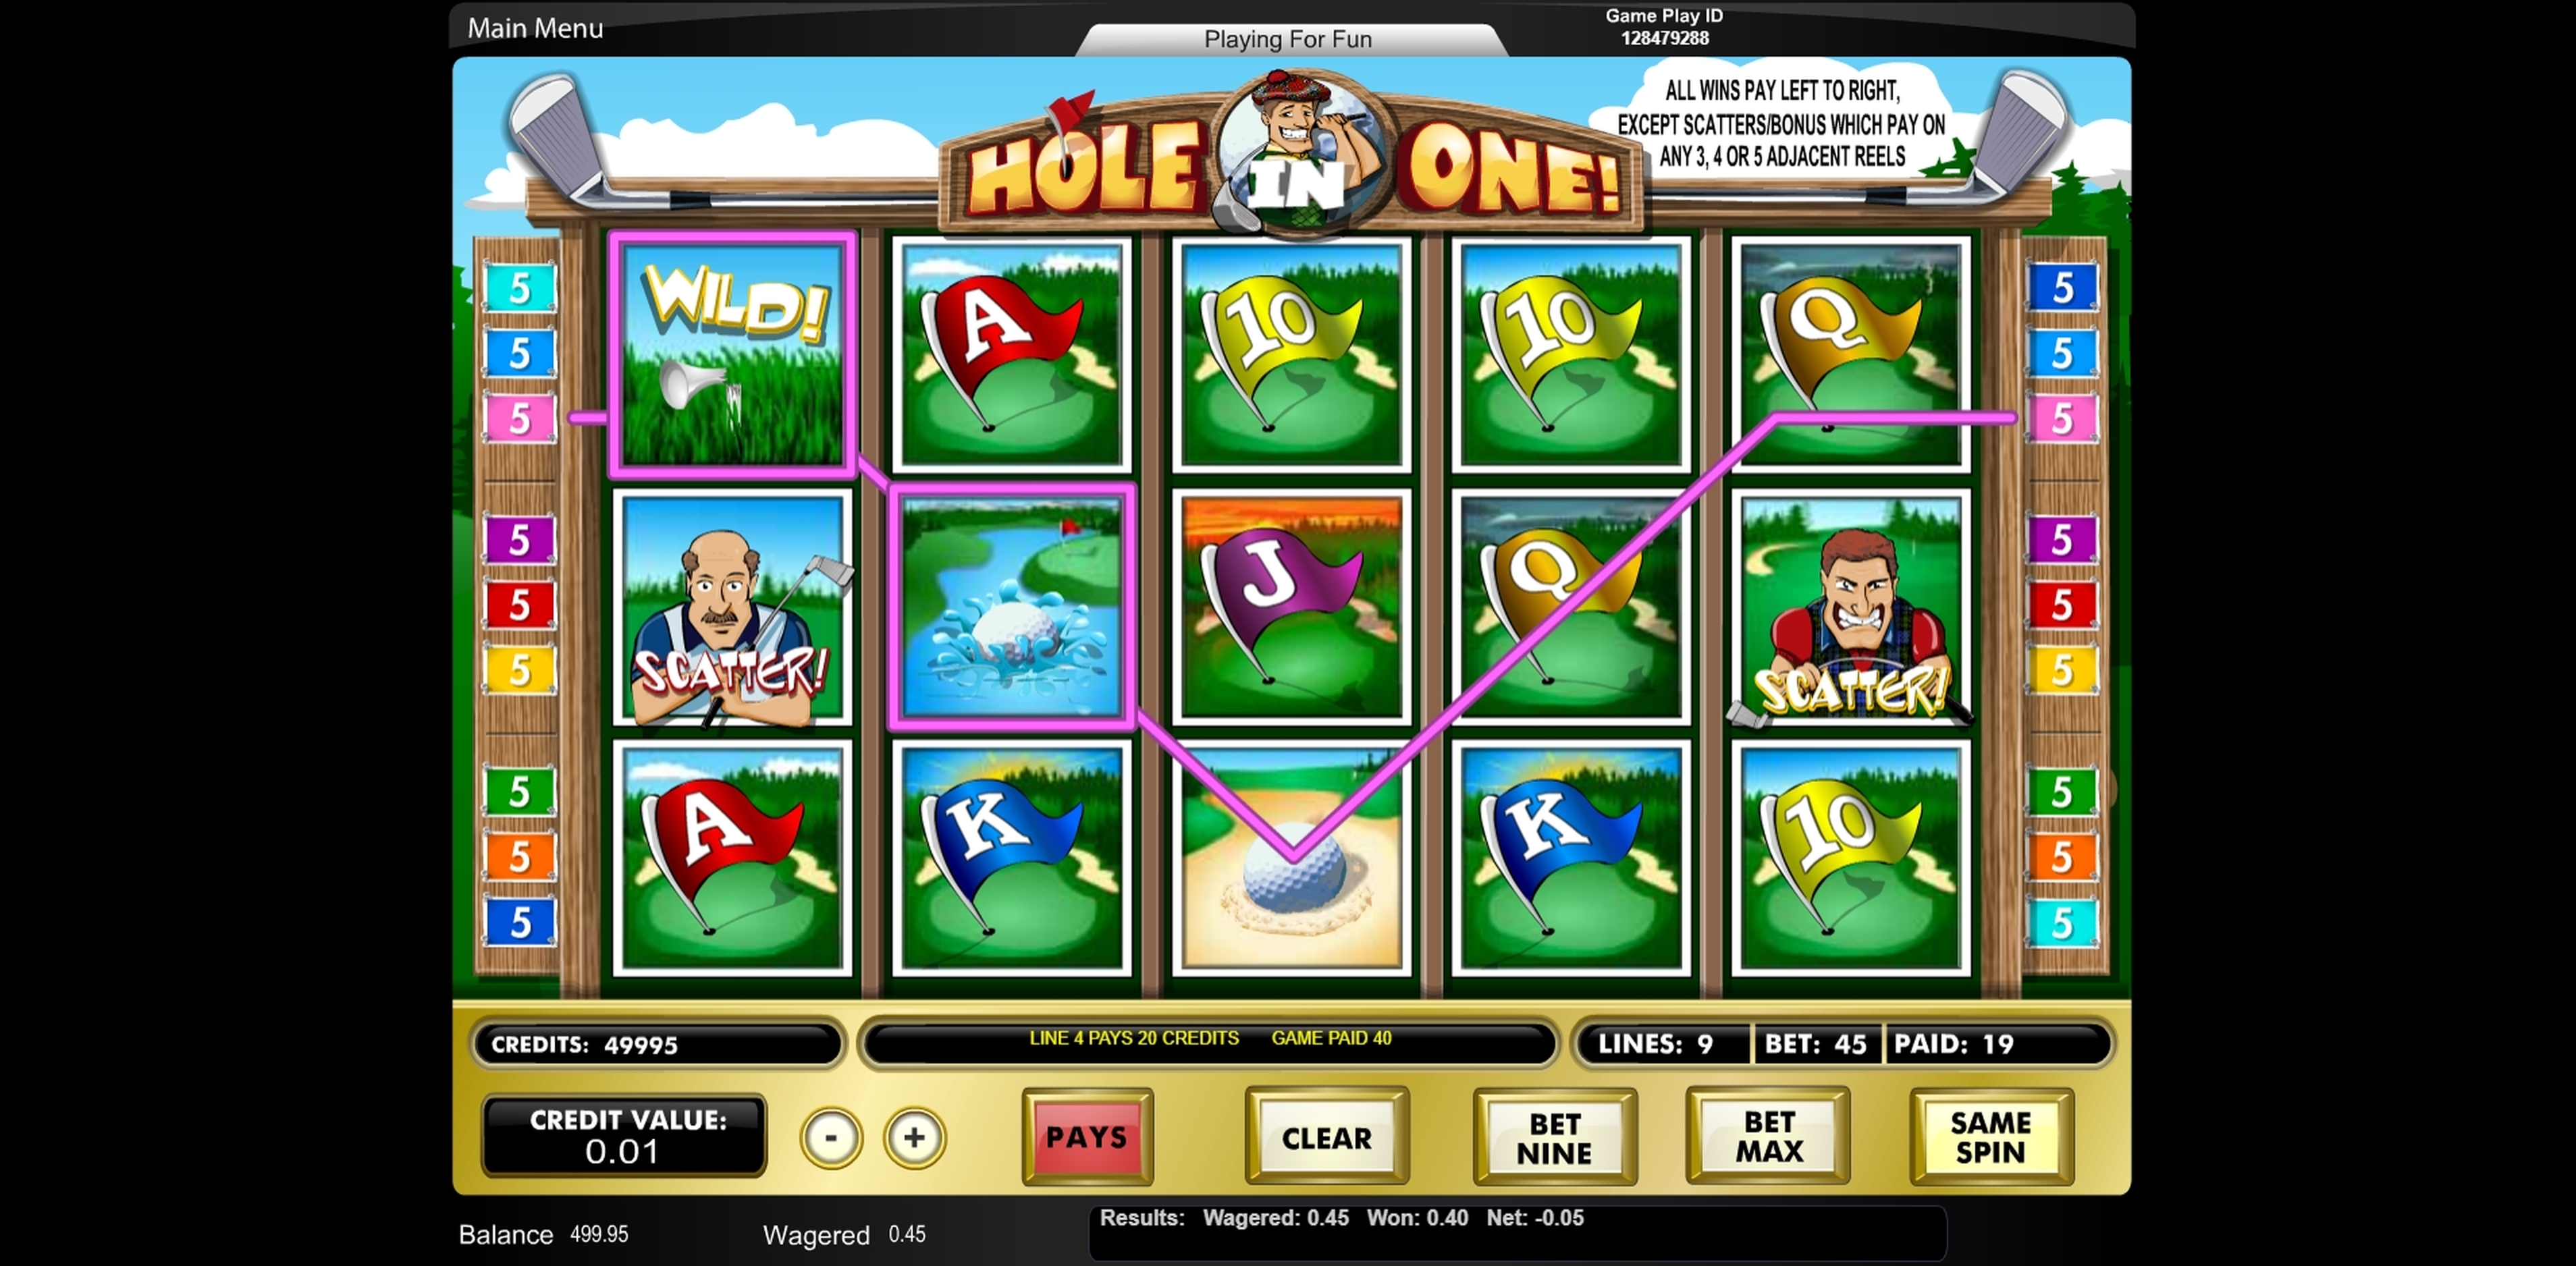 Win Money in Hole in One Free Slot Game by Amaya